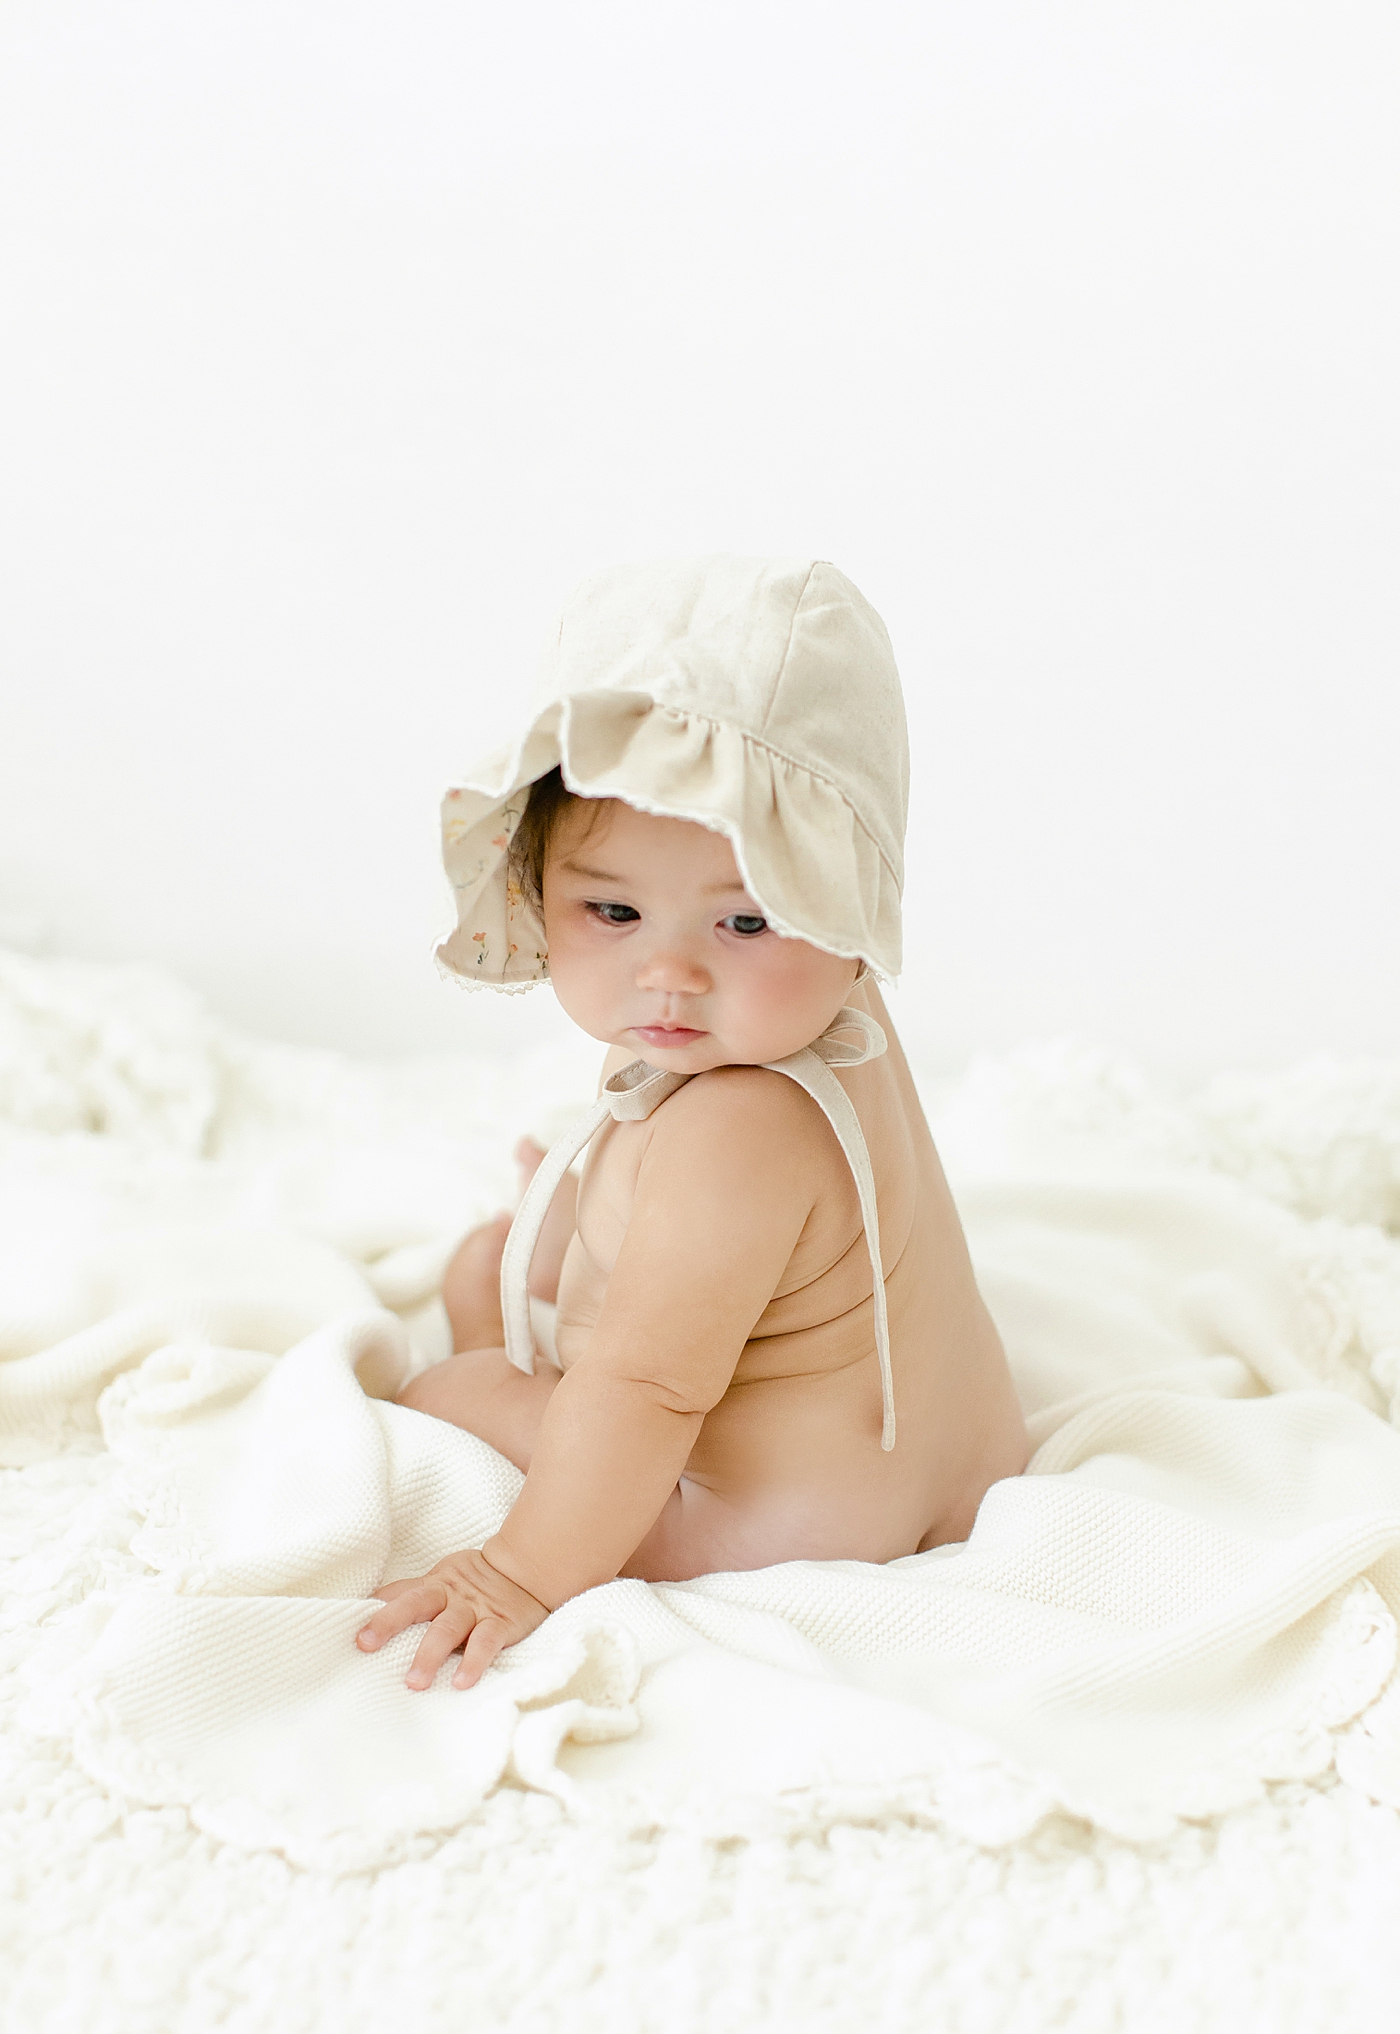 Baby girl in a bonnet looking over her shoulder | Image by Chrissy Winchester Photography